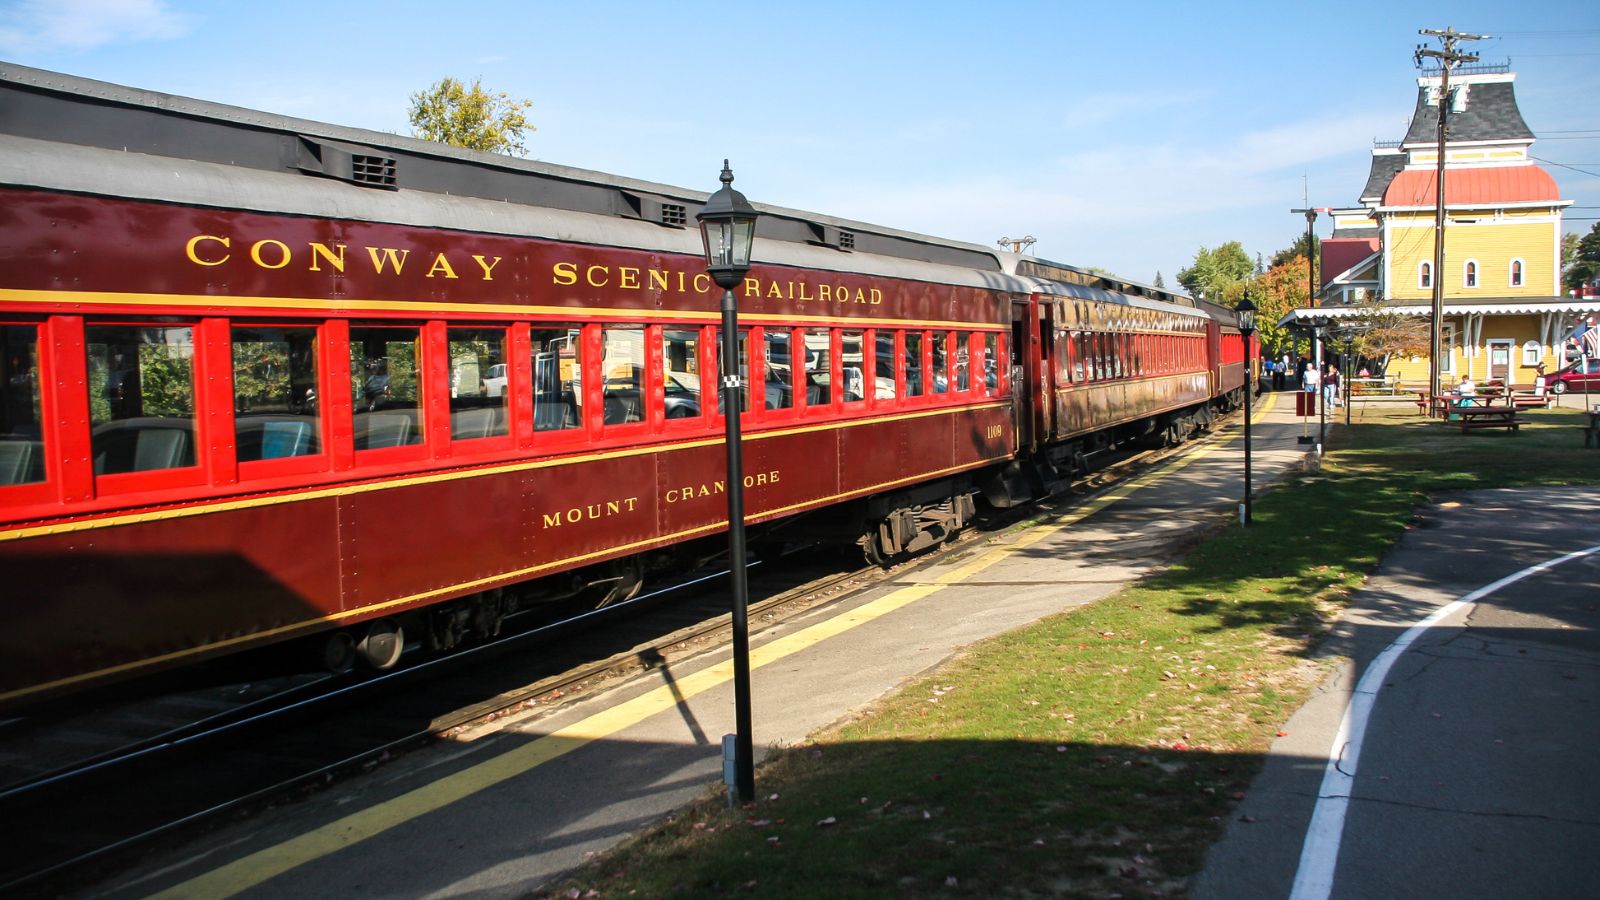 Conway Scenic Railroad in North Conway, New Hampshire (Photo: Shutterstock)